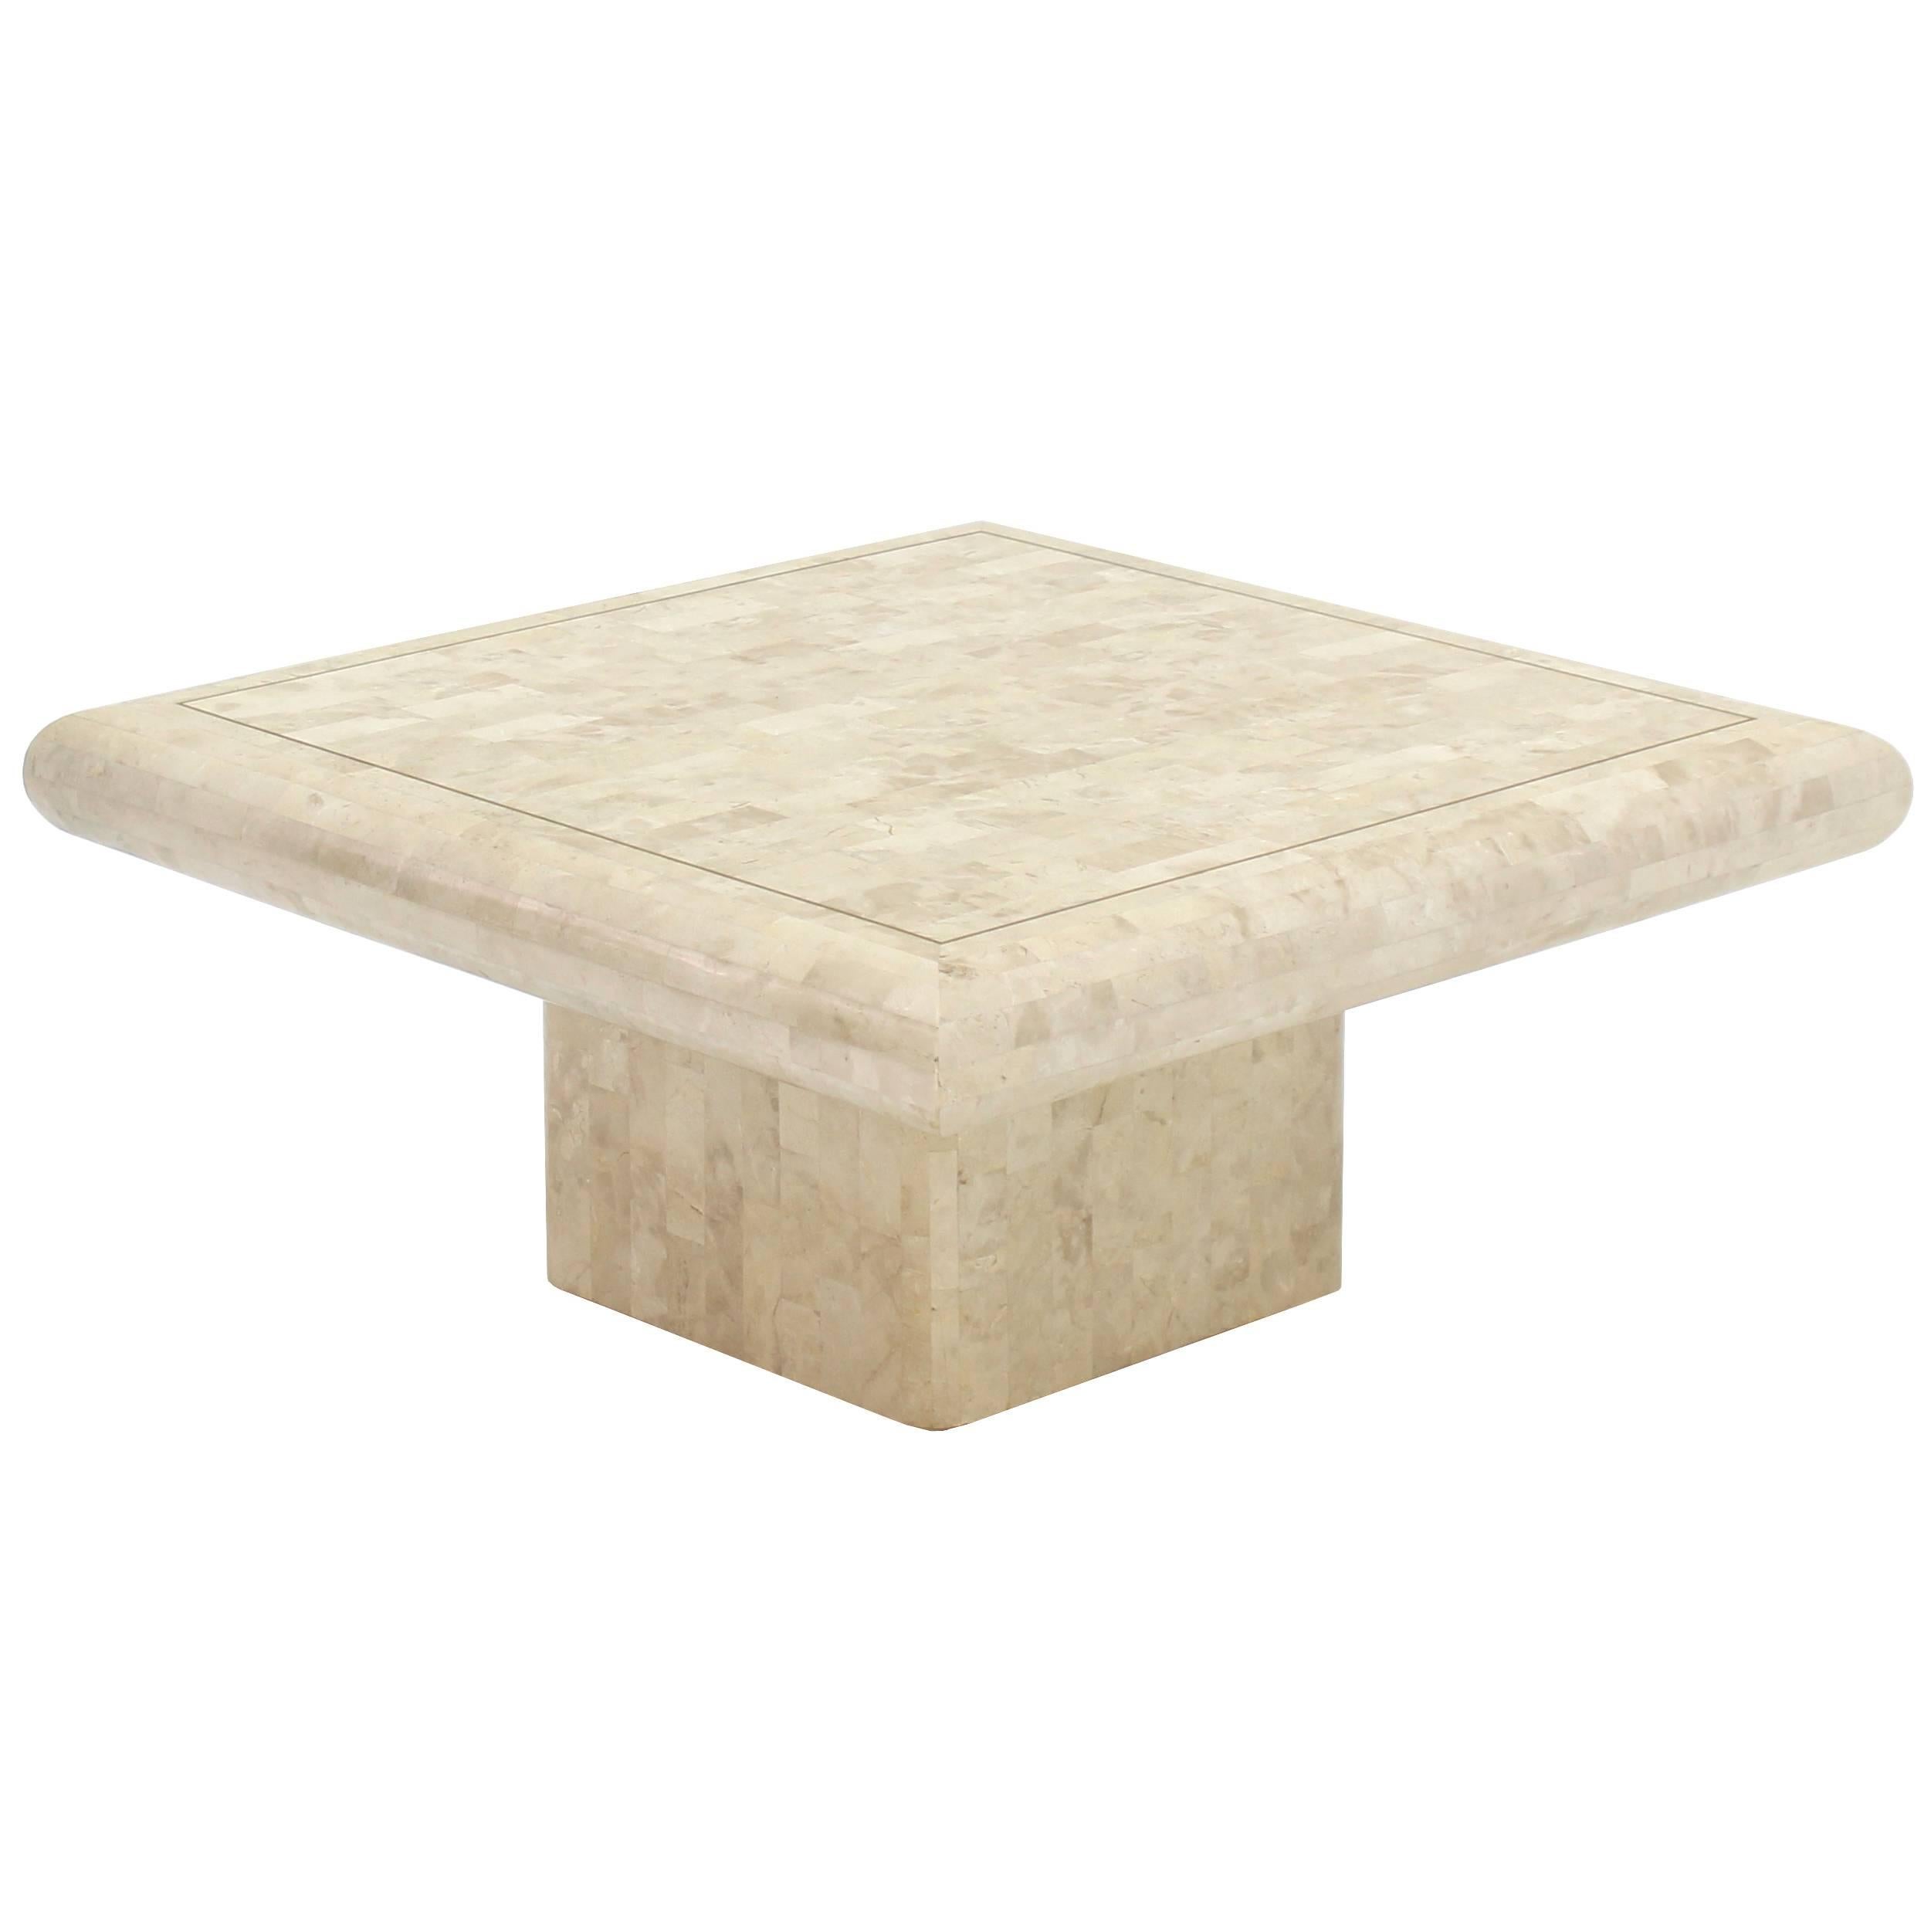 Tessellated Stone Tile Coffee Table For Sale